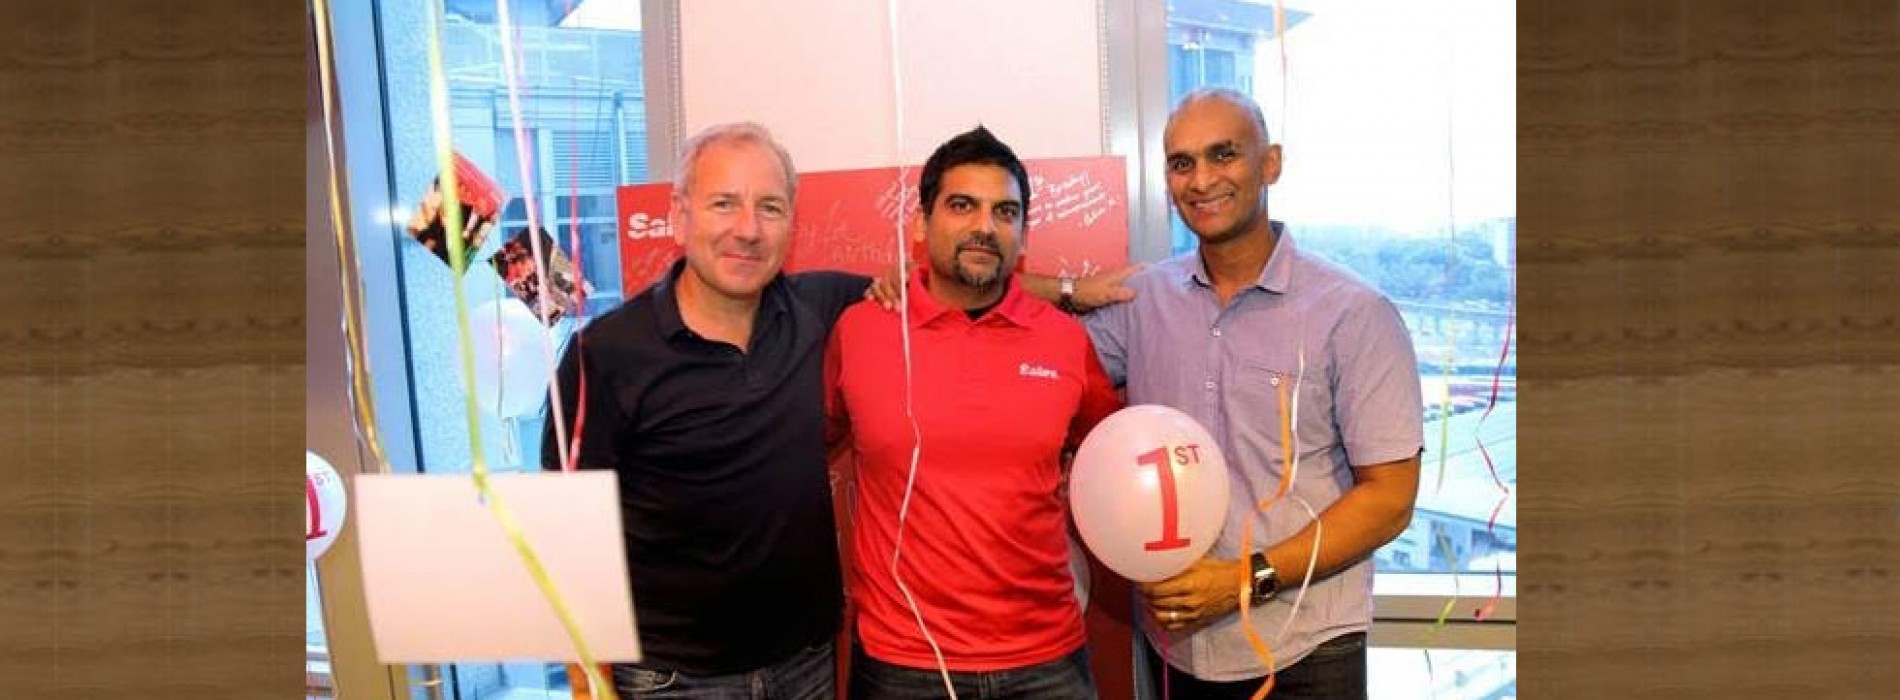 Sabre Travel Network celebrates a year of growth in Asia Pacific